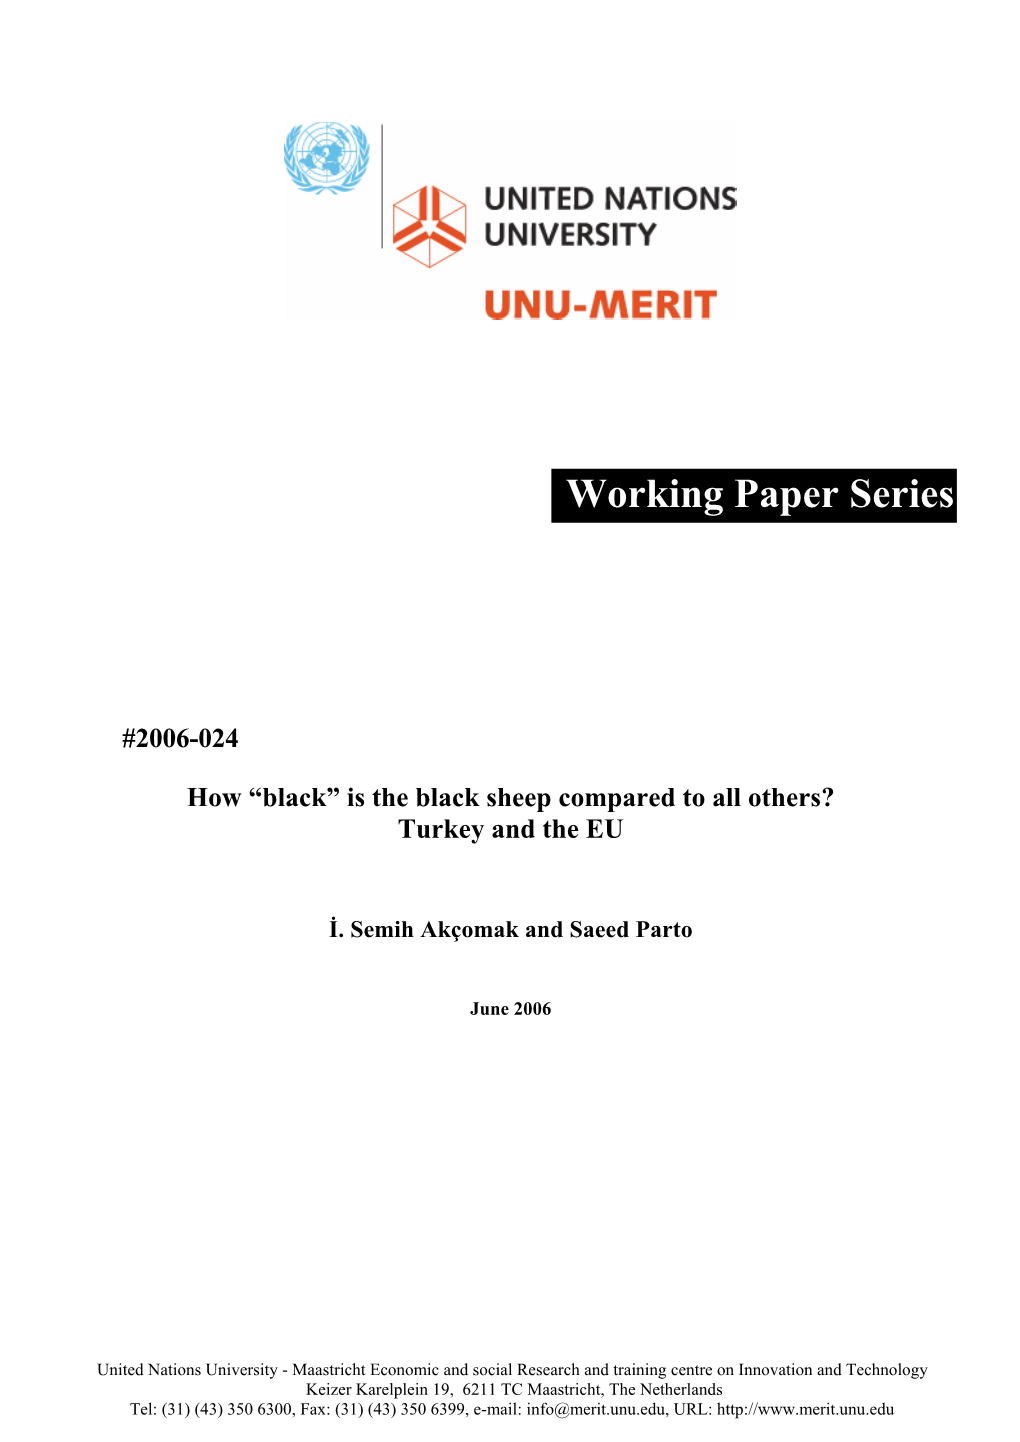 Download the Working Paper